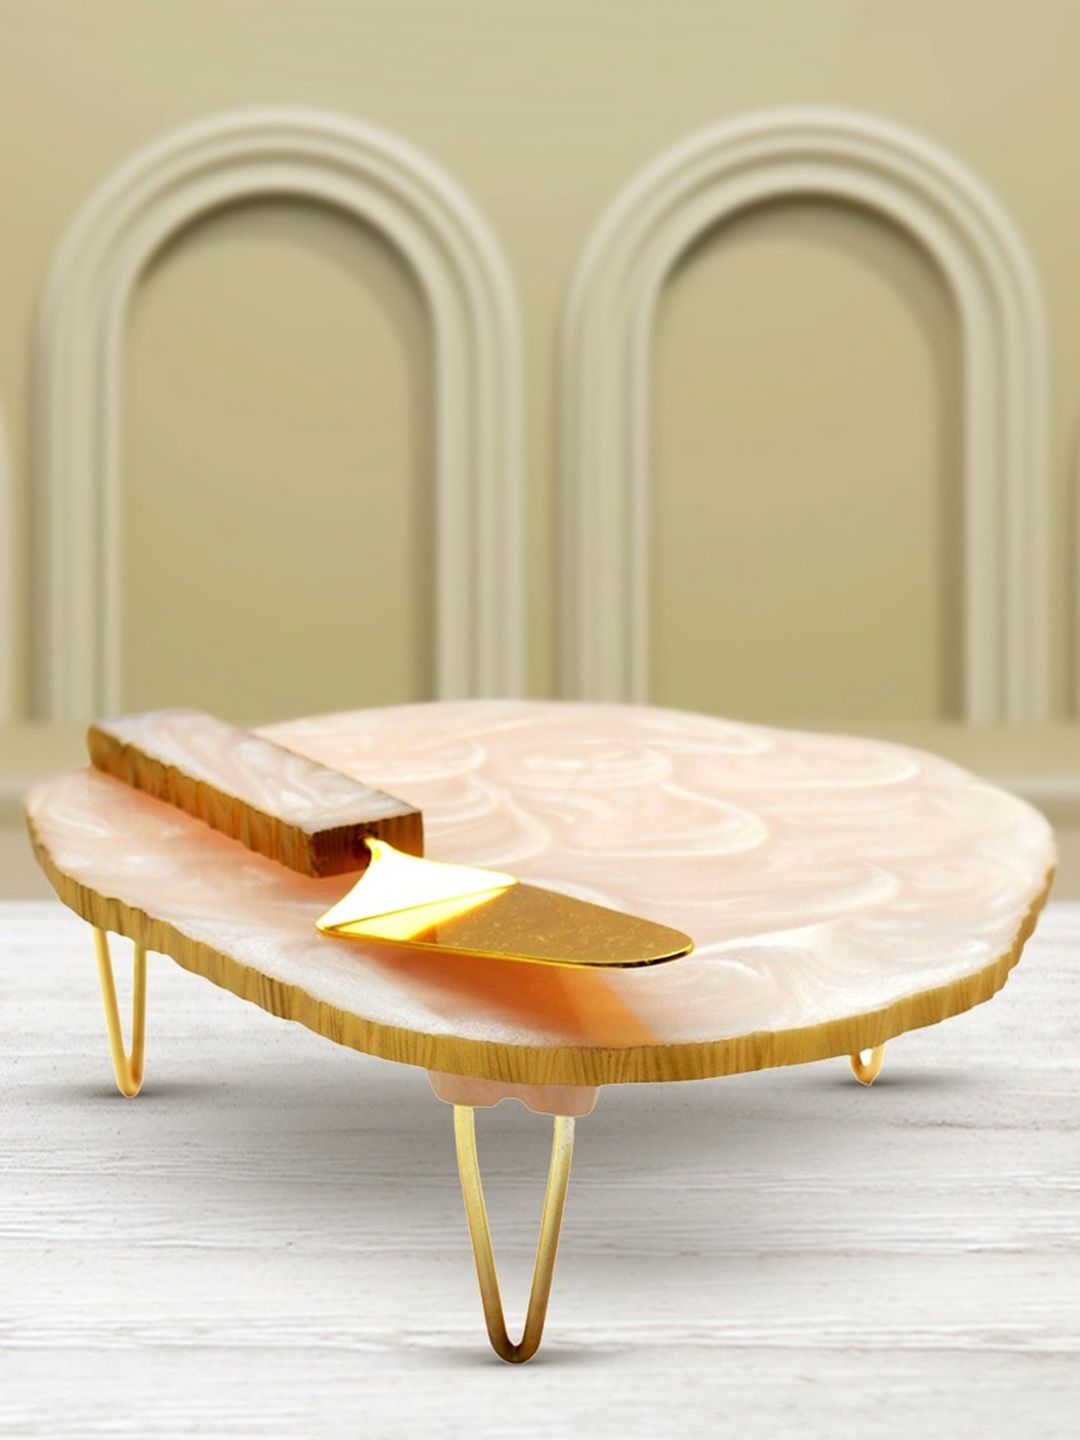 Tranquil square Brown & Golden Tone Printed Cake Stand And Server Price in India